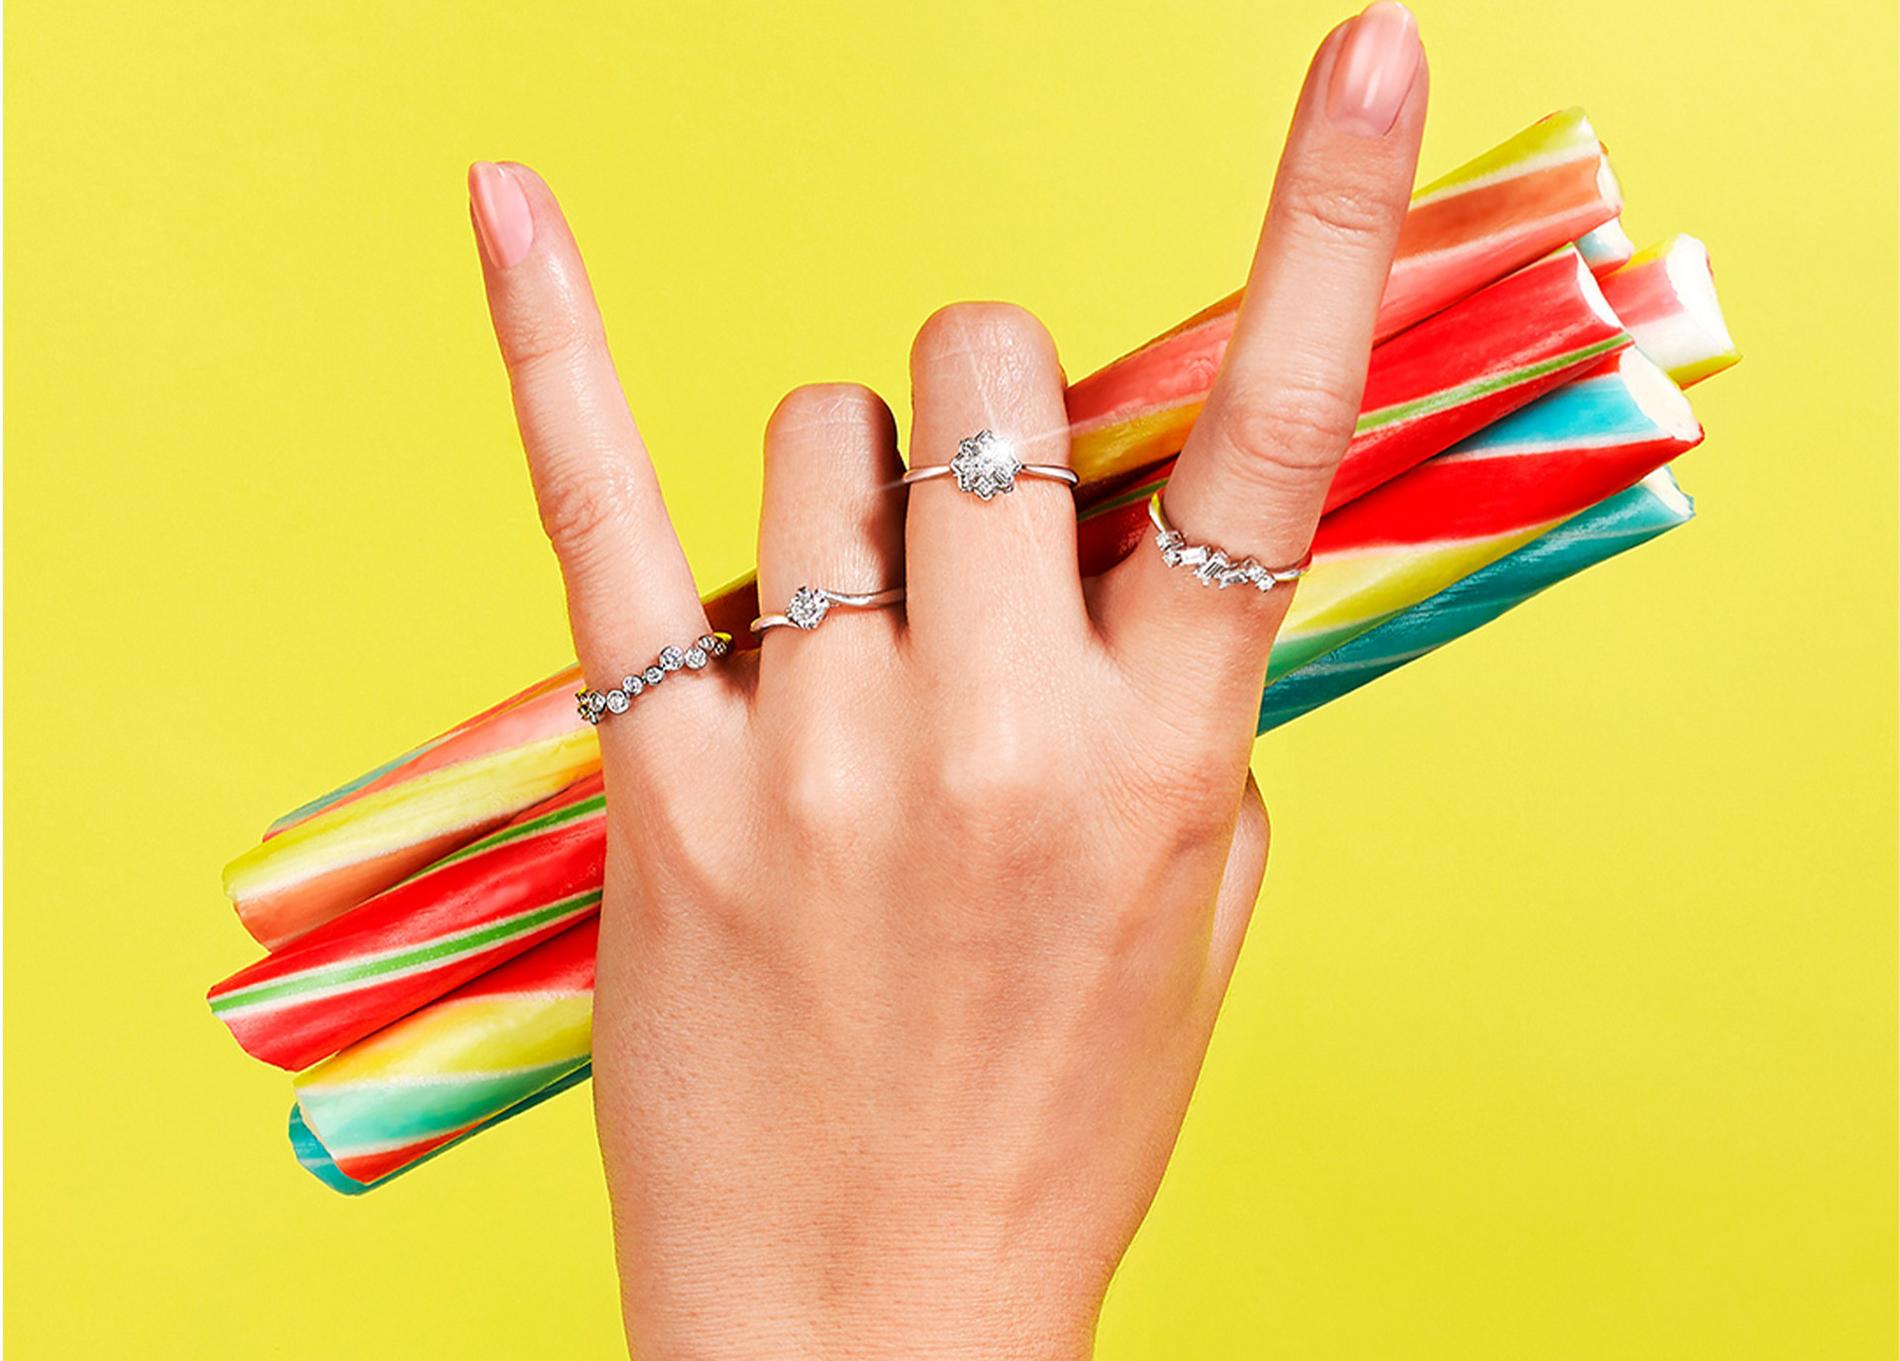 How Your Jewellery Channels Your Vibe? Rock on hand symbol wearing diamond rings and holding rock candy